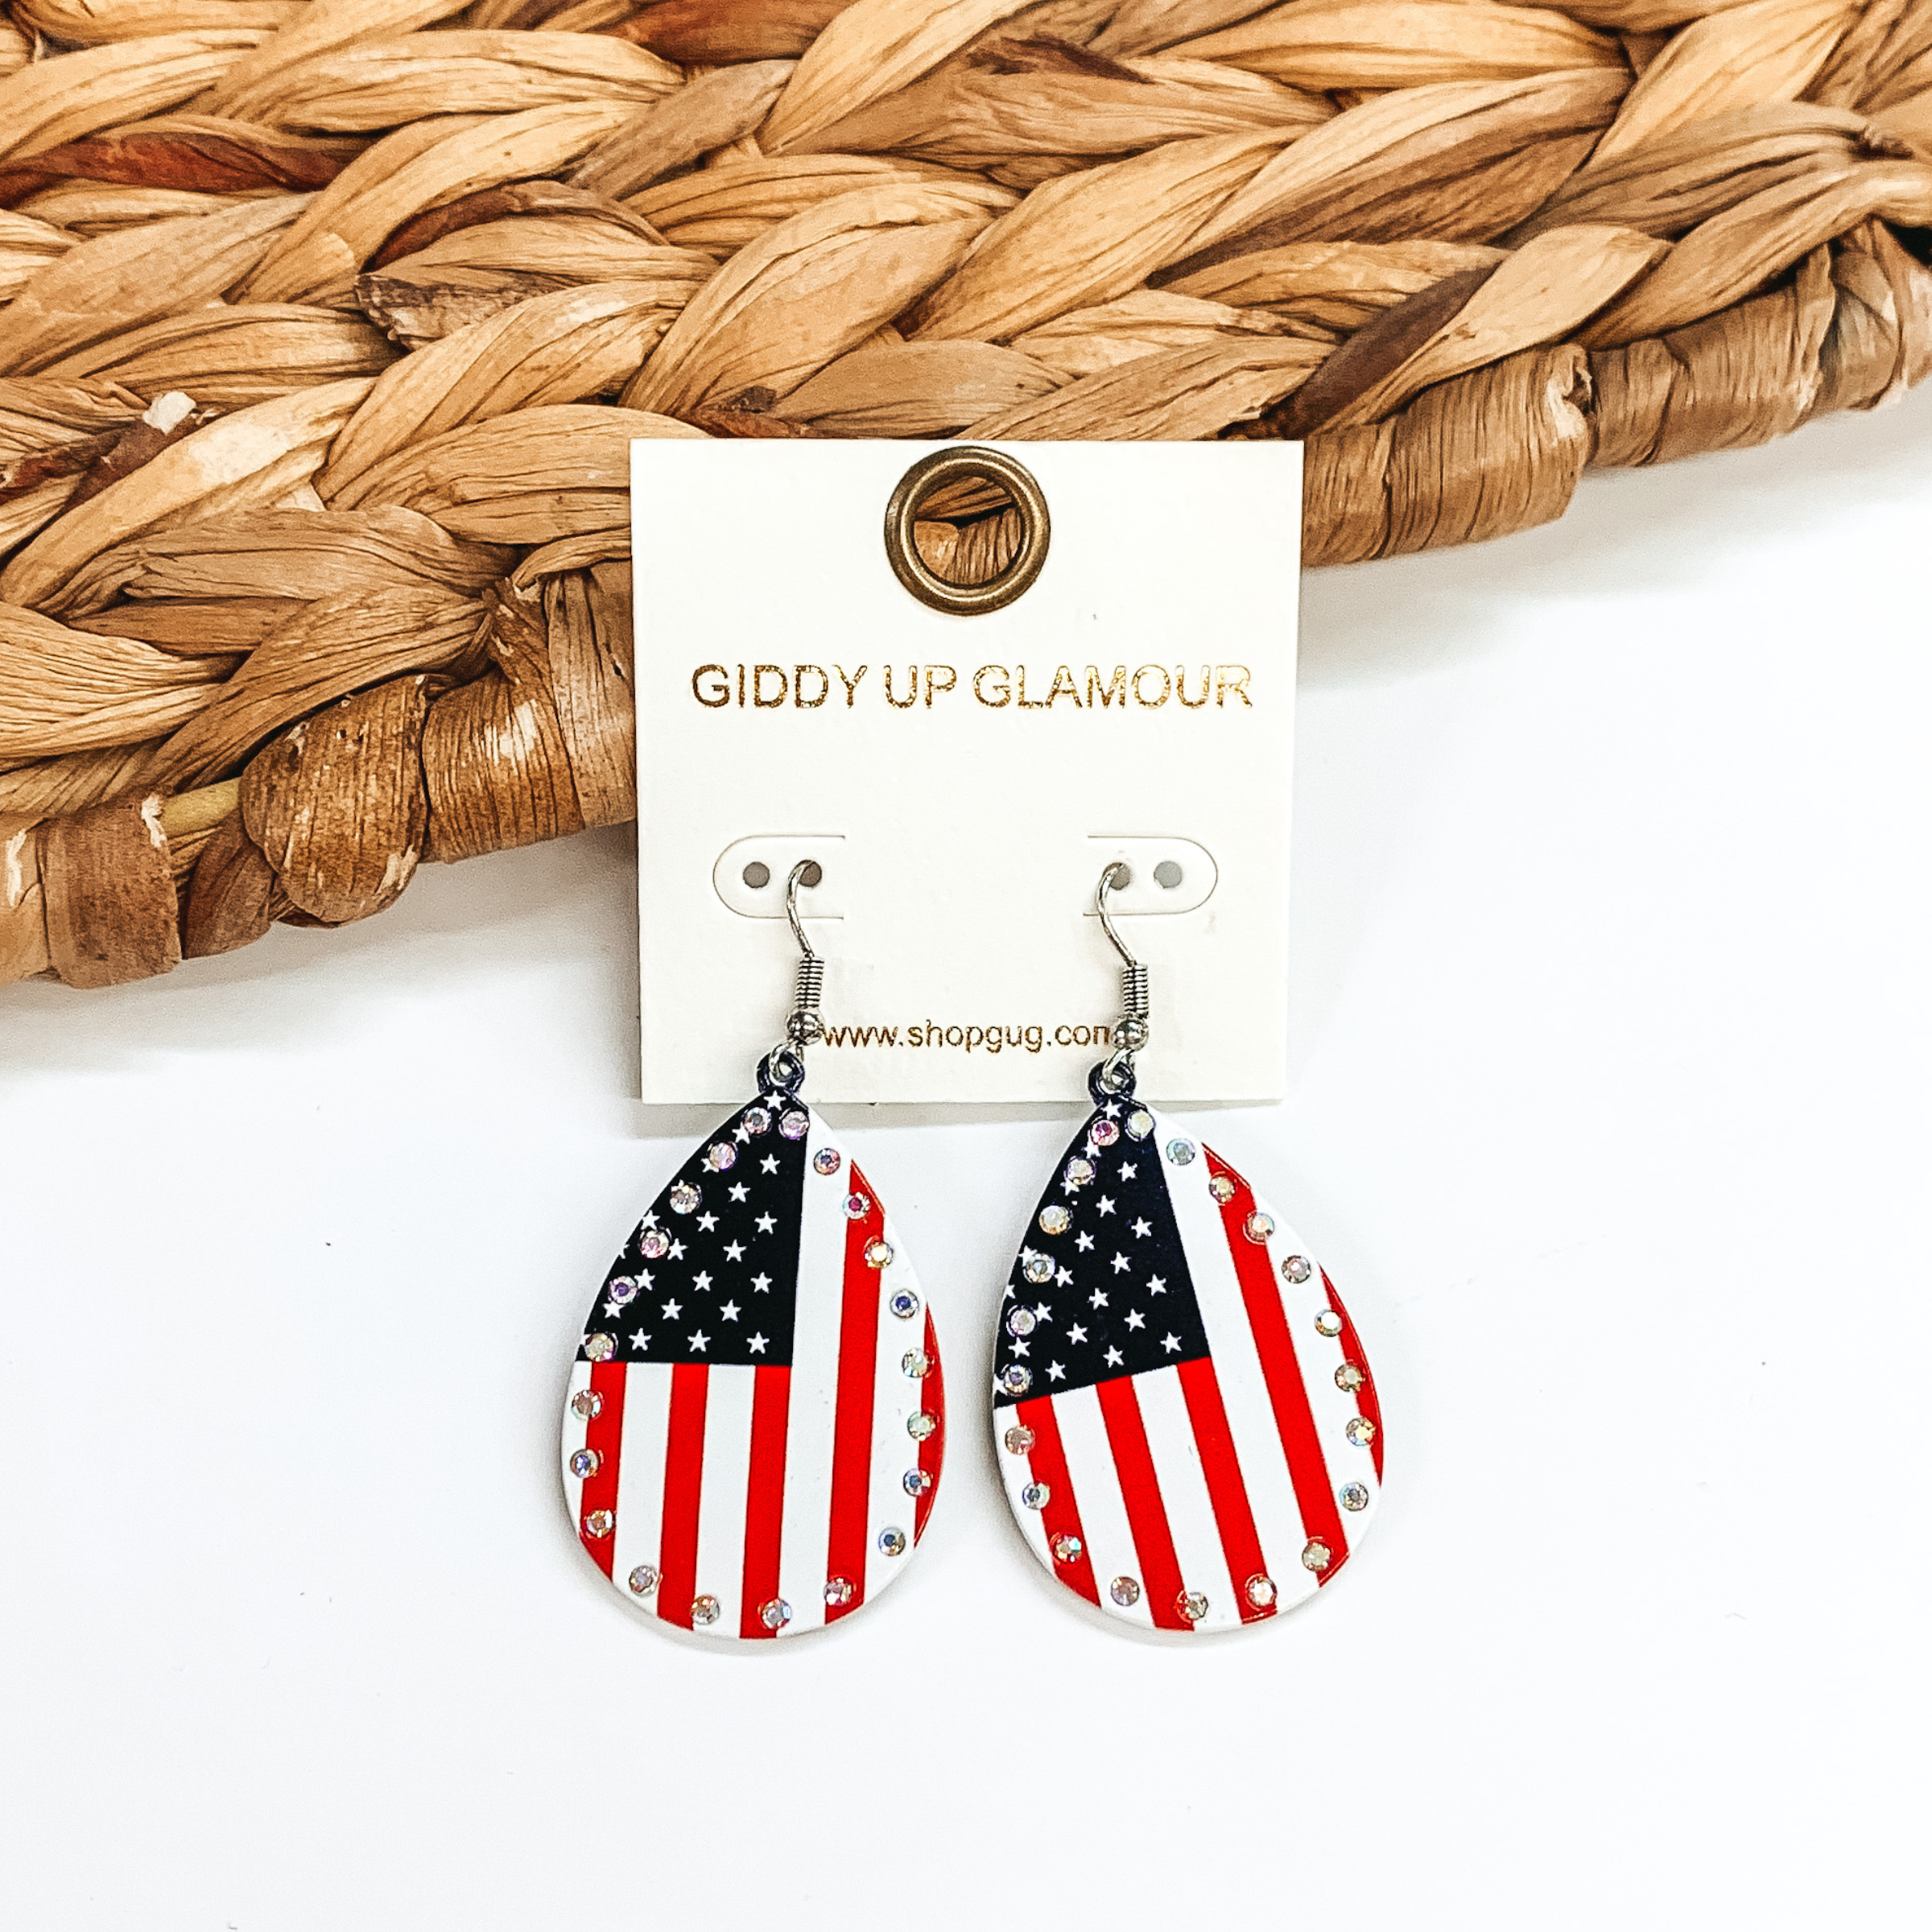 These are teardrop earrings with AB crystals all  around with the American flag.  These earrings are taken on  a white background and leaned up against a brown  woven slate.